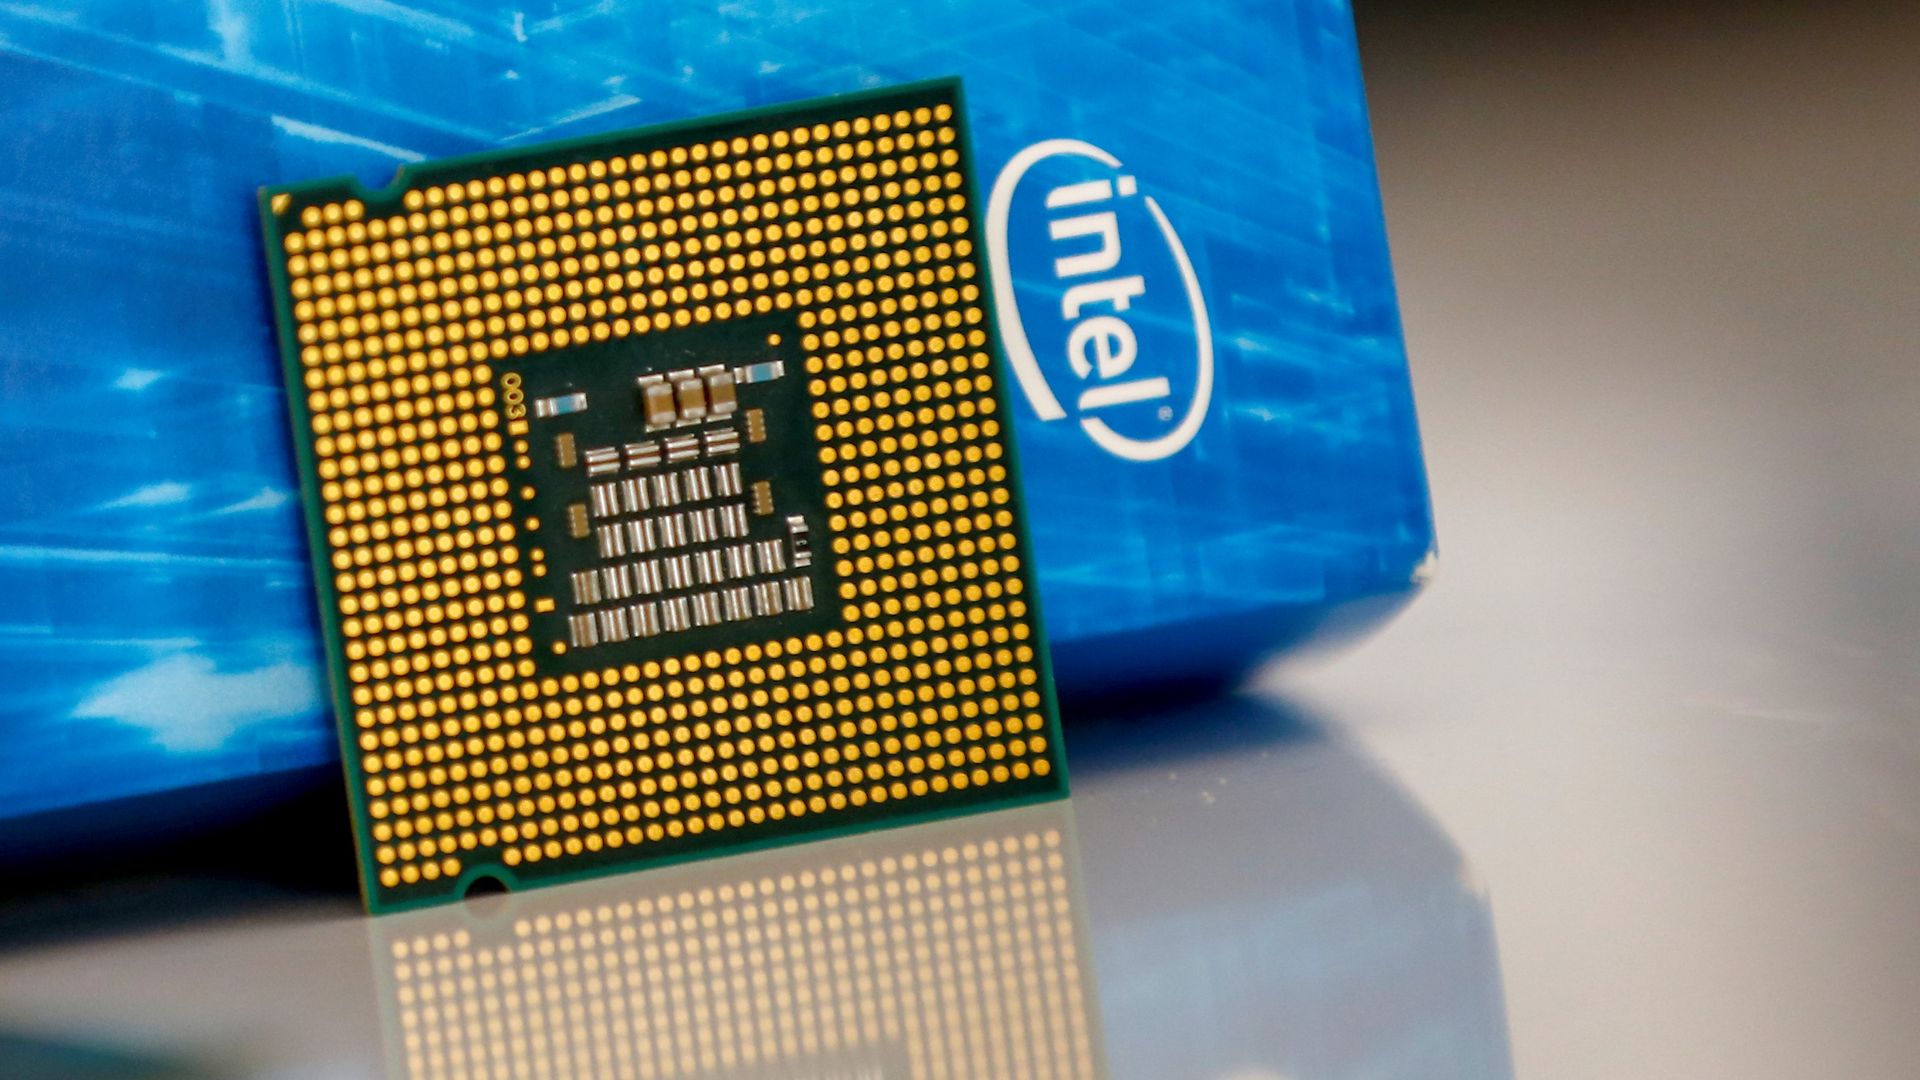 The Intel logo and a processor chip in a photo.